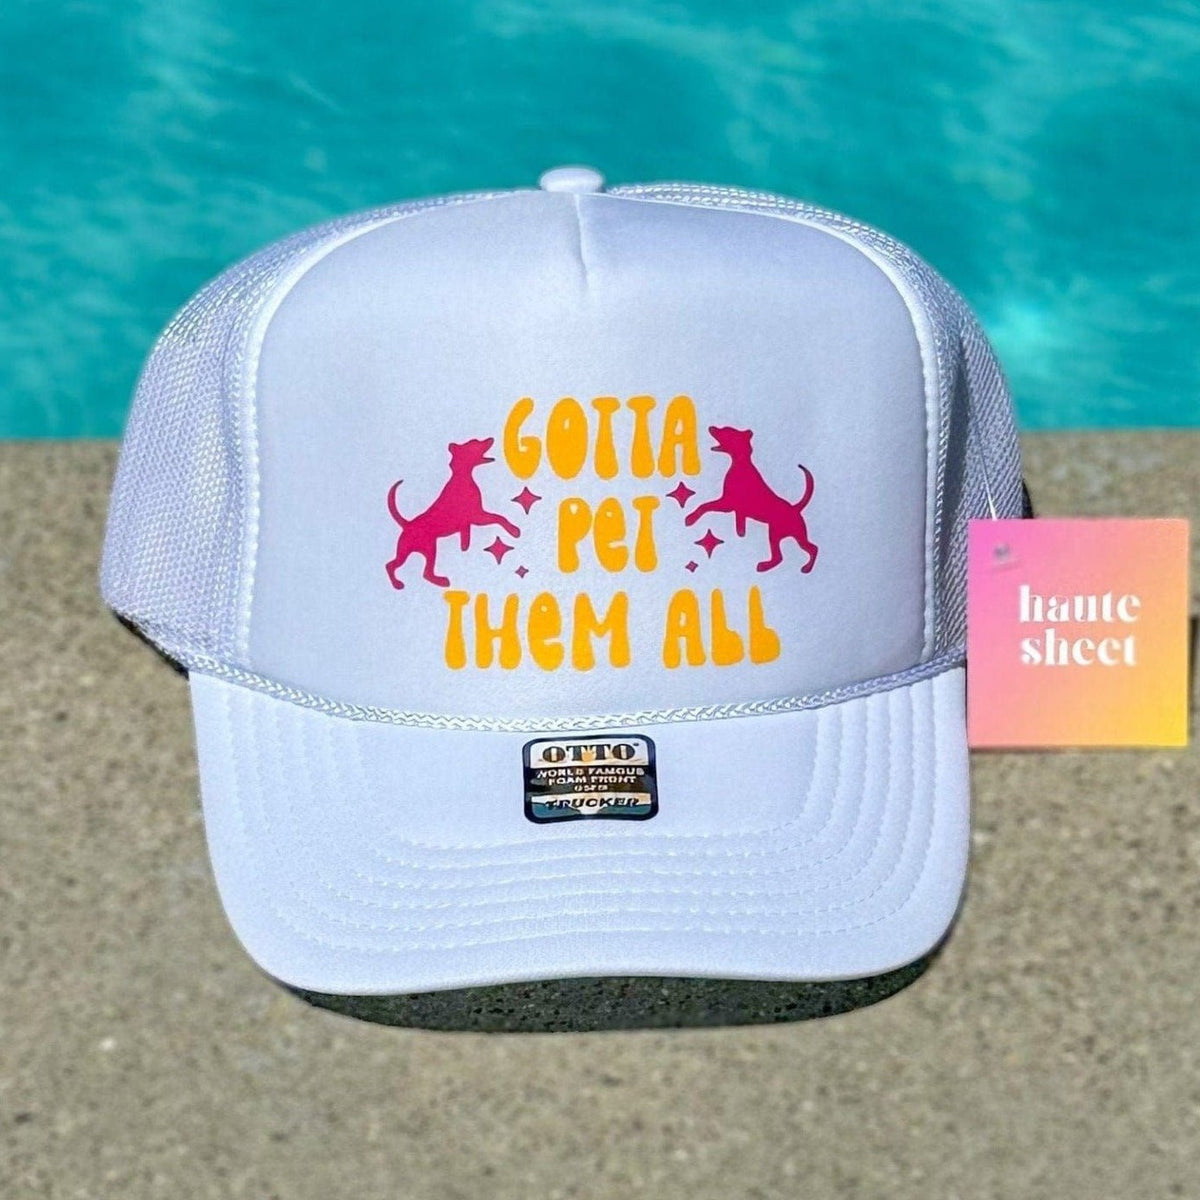 Gotta Pet Them All | White Trucker Hat by Haute Sheet Hats TheFringeCultureCollective